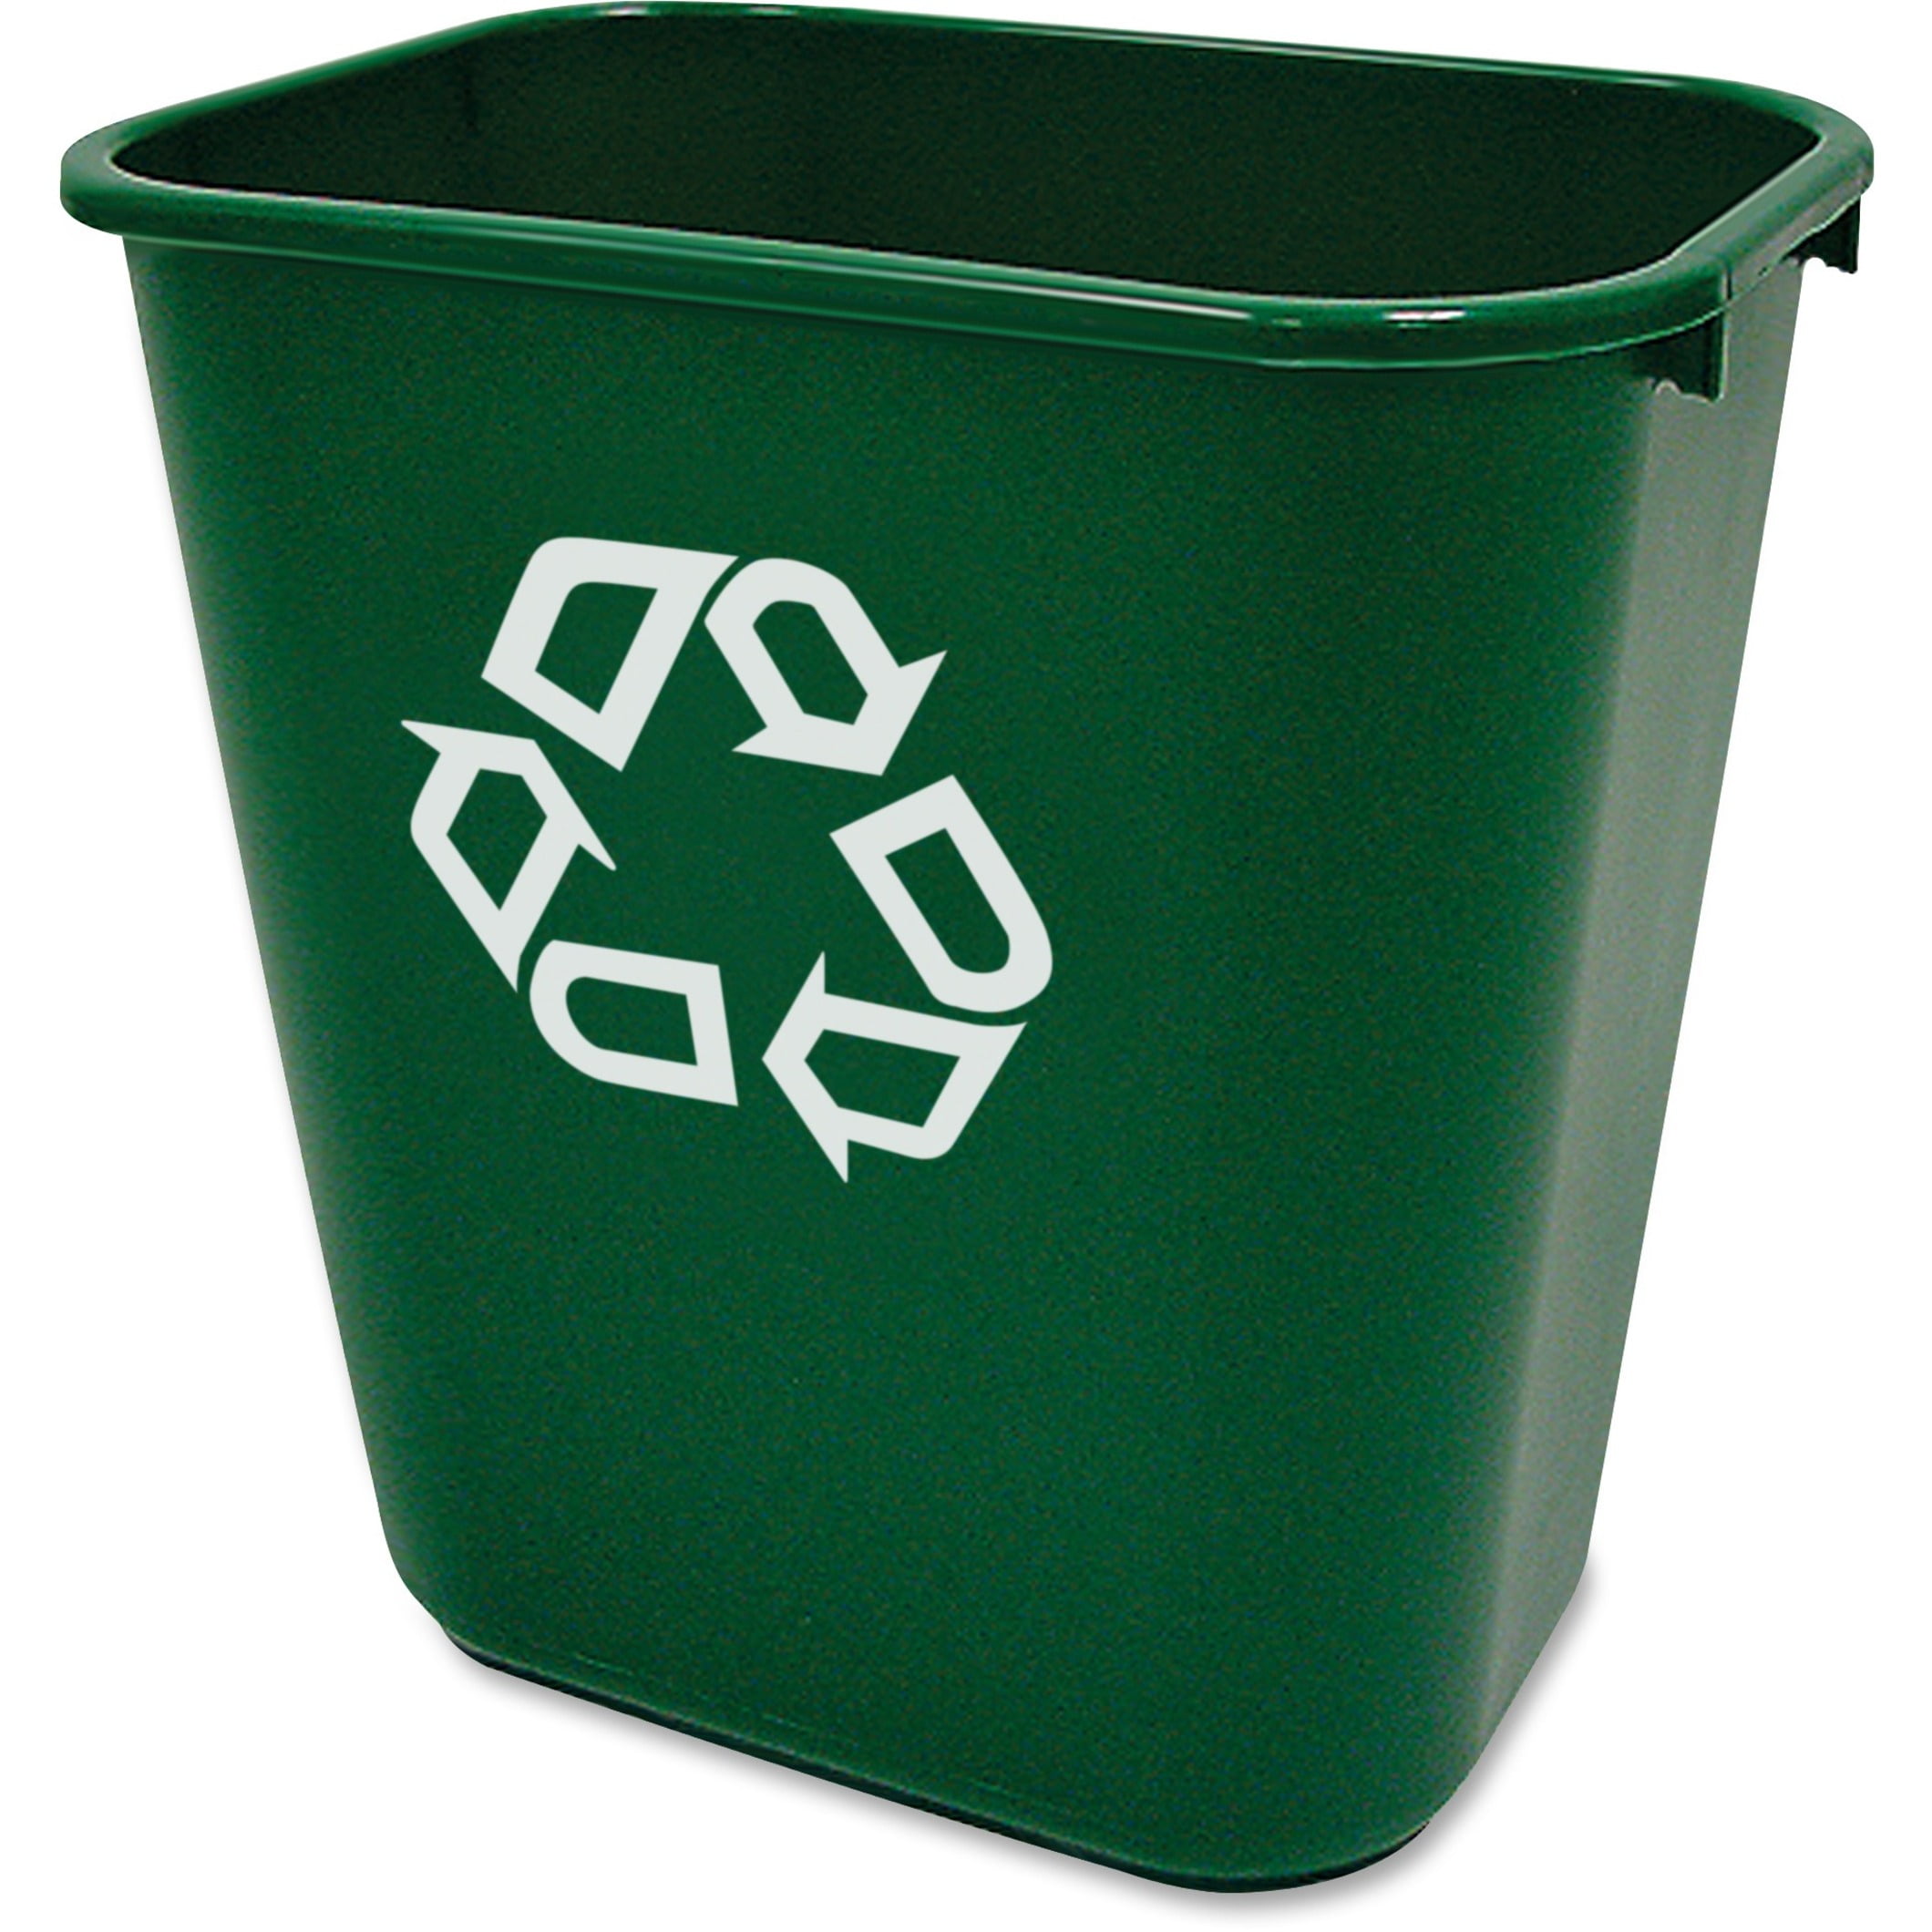 G U S Recycle Bins for Home and Office Set of 2 Waterproof Bags with Sturdy Handles